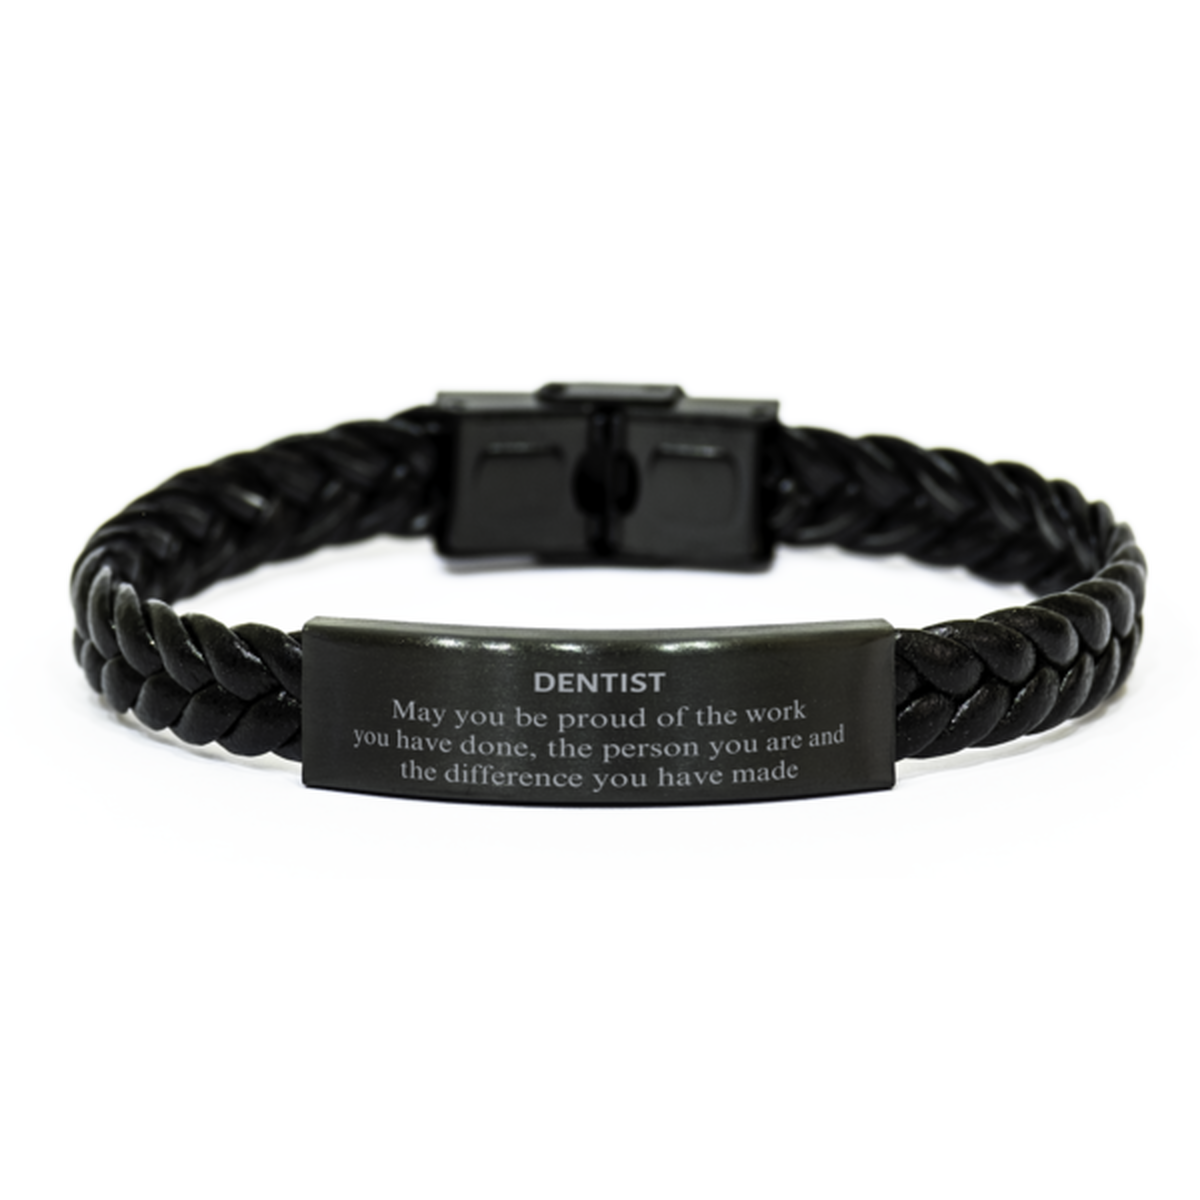 Dentist May you be proud of the work you have done, Retirement Dentist Braided Leather Bracelet for Colleague Appreciation Gifts Amazing for Dentist